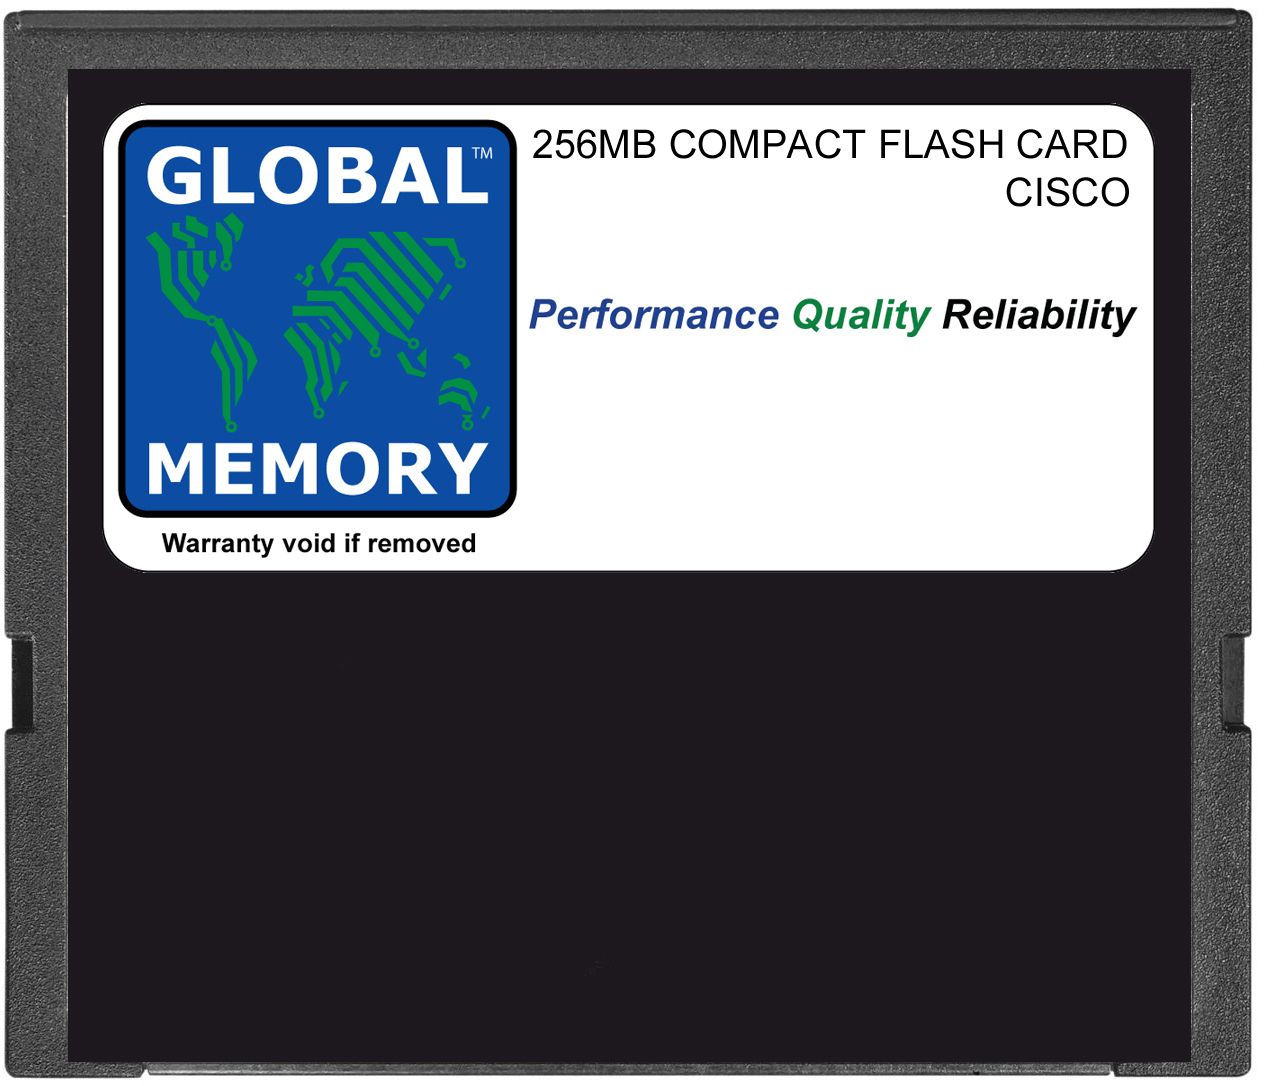 256MB COMPACT FLASH CARD MEMORY FOR CISCO 7200 SERIES ROUTERS NPE-G2 (MEM-NPE-G2-FLS256)